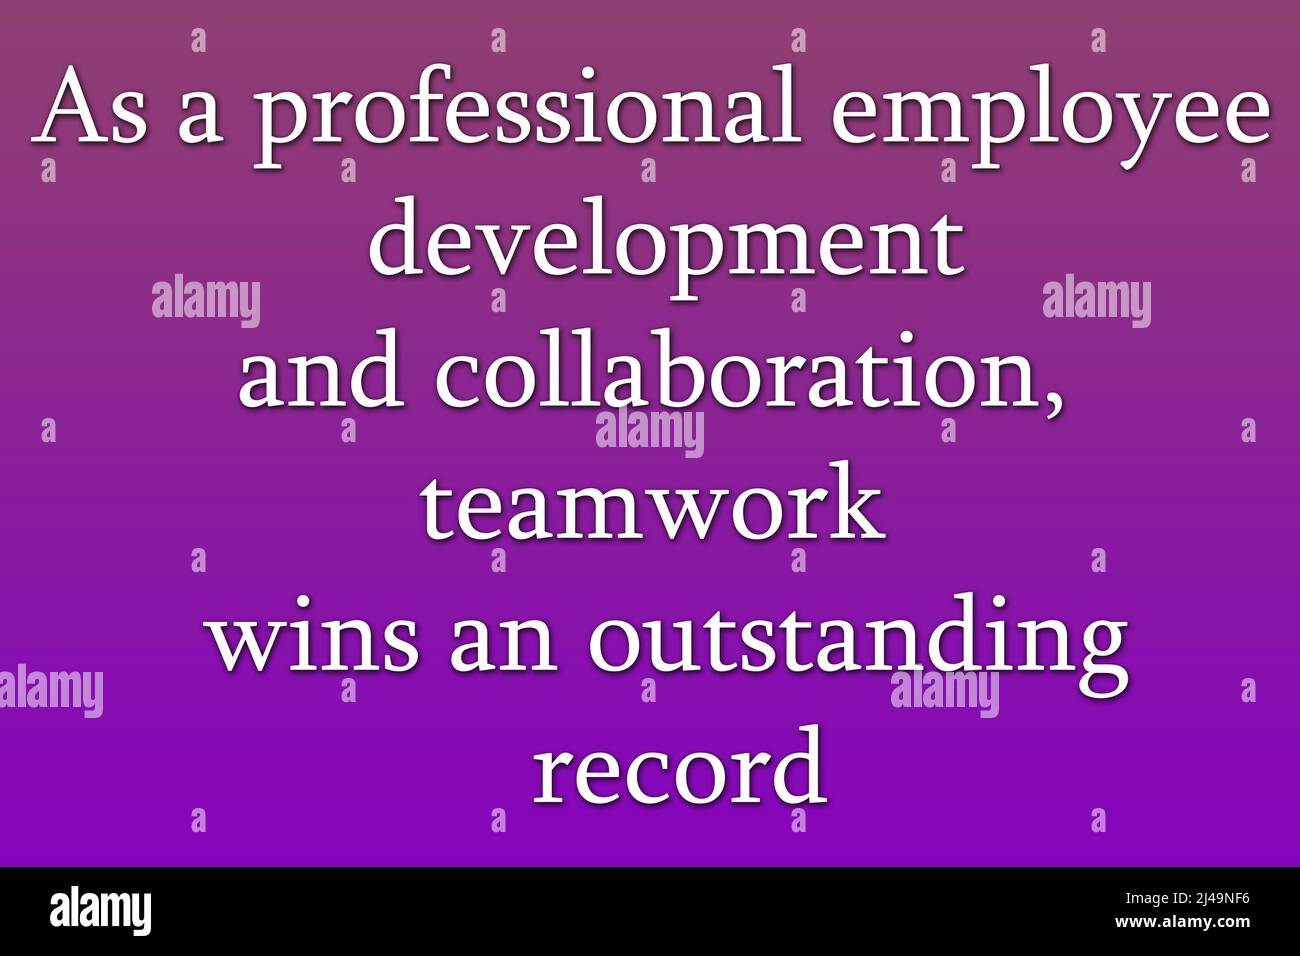 As a professional employee development and collaboration, teamwork wins an outstanding record. text. dark gradient background Stock Photo